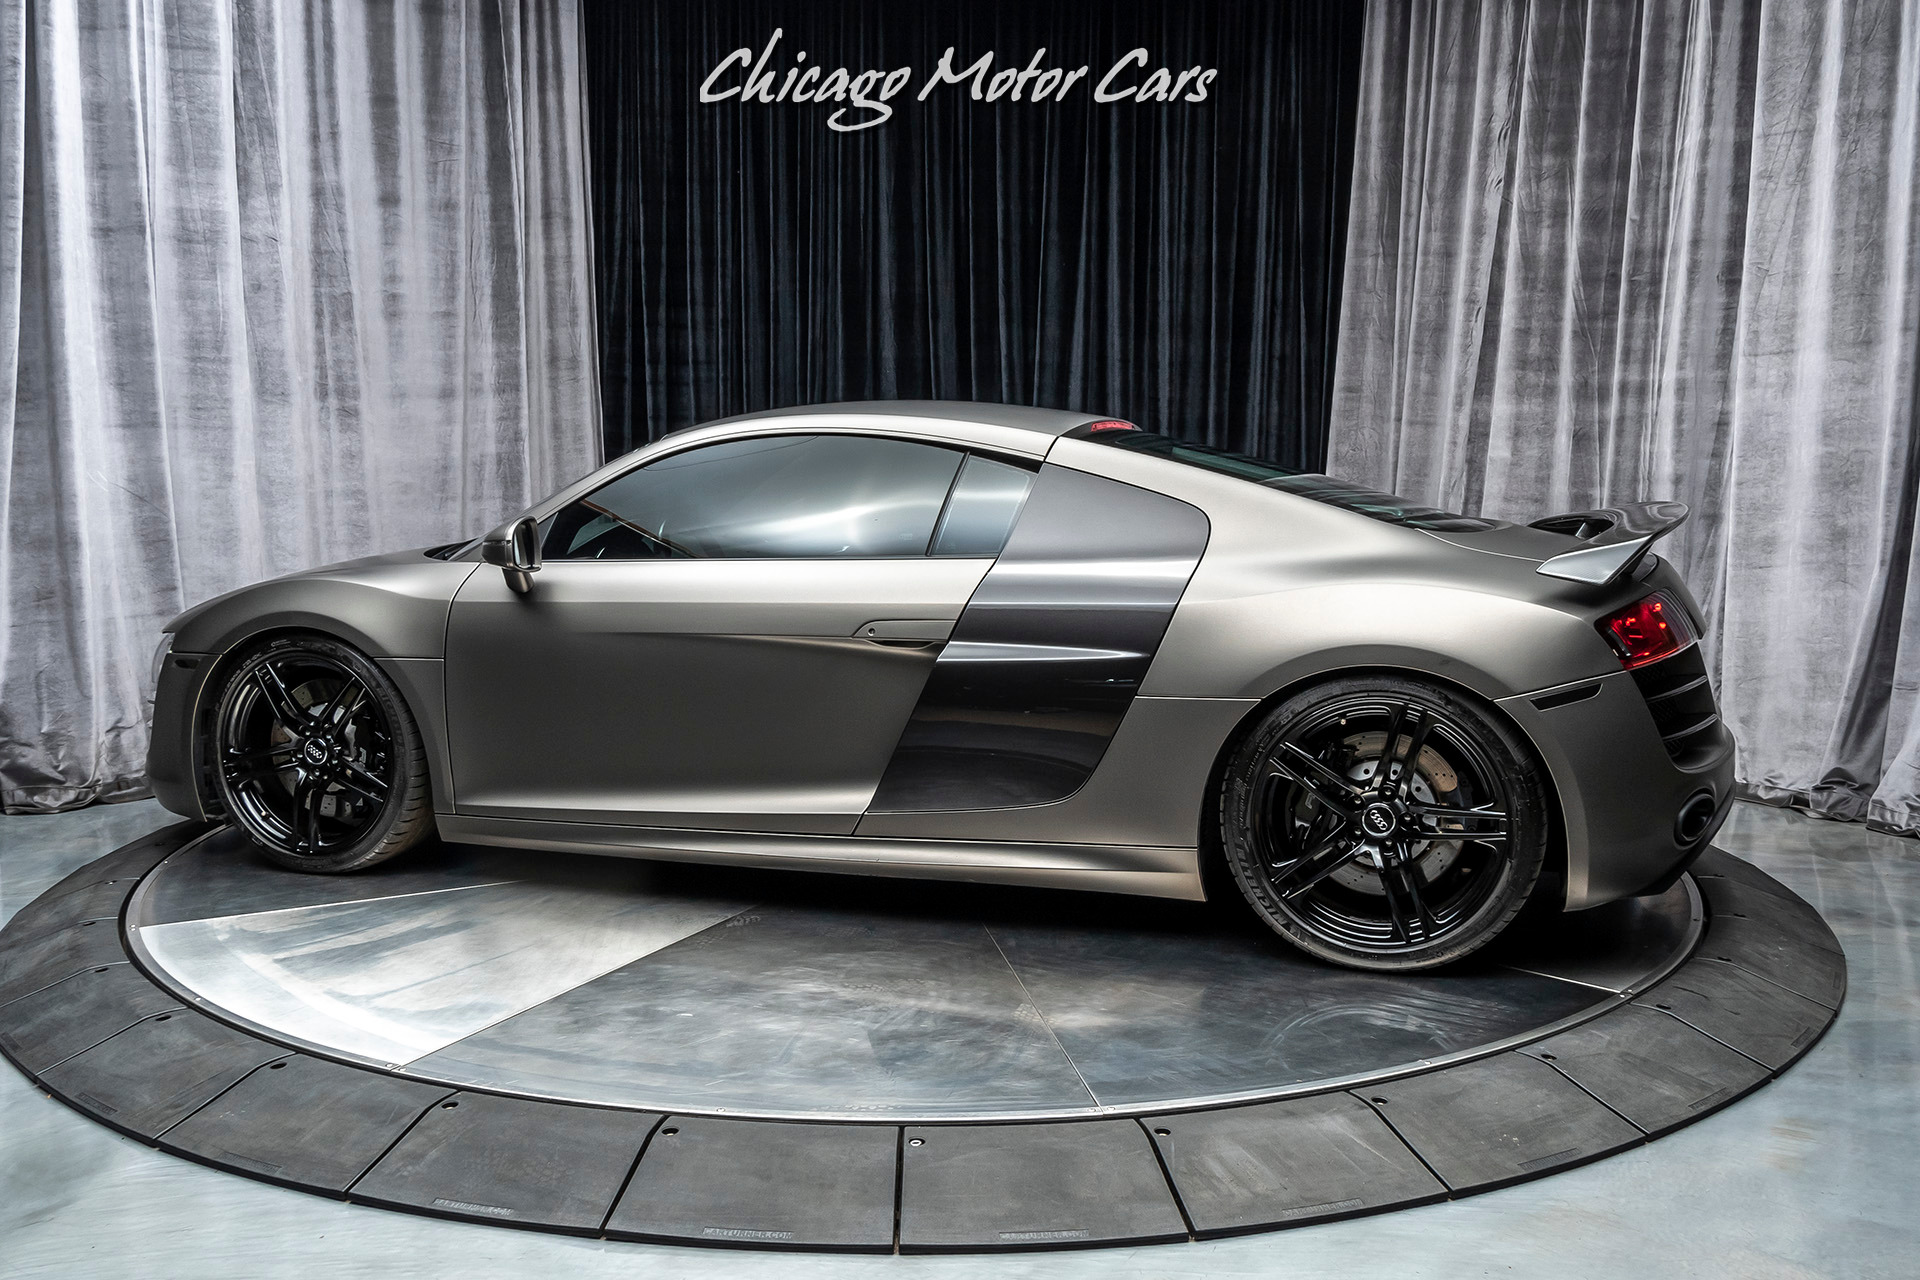 Used-2011-Audi-R8-52-quattro-V10-6-Speed-Manual-AMS-Twin-Turbo-Alpha-Package